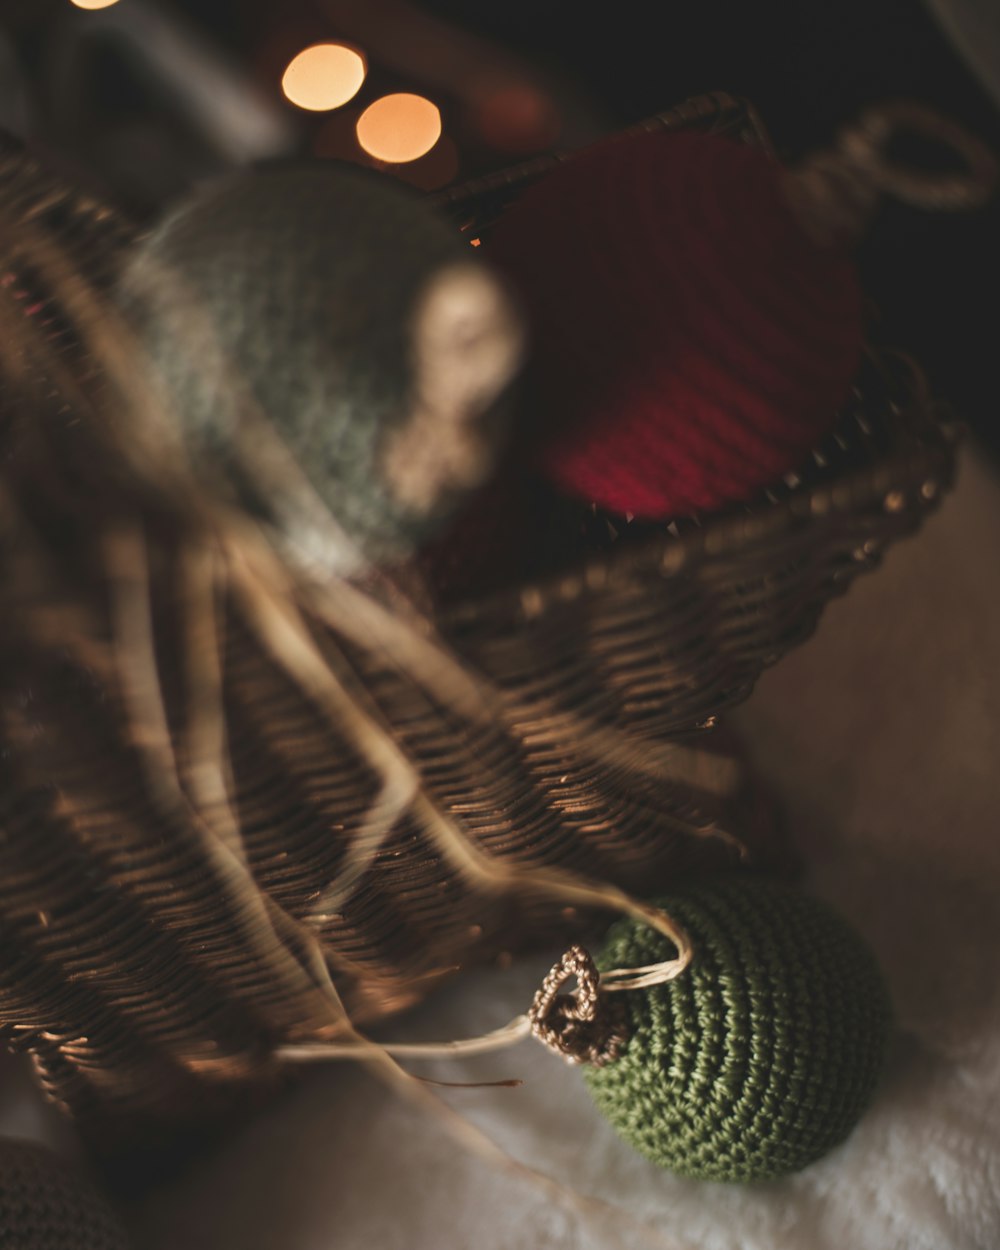 a close up of a knitted object in a basket